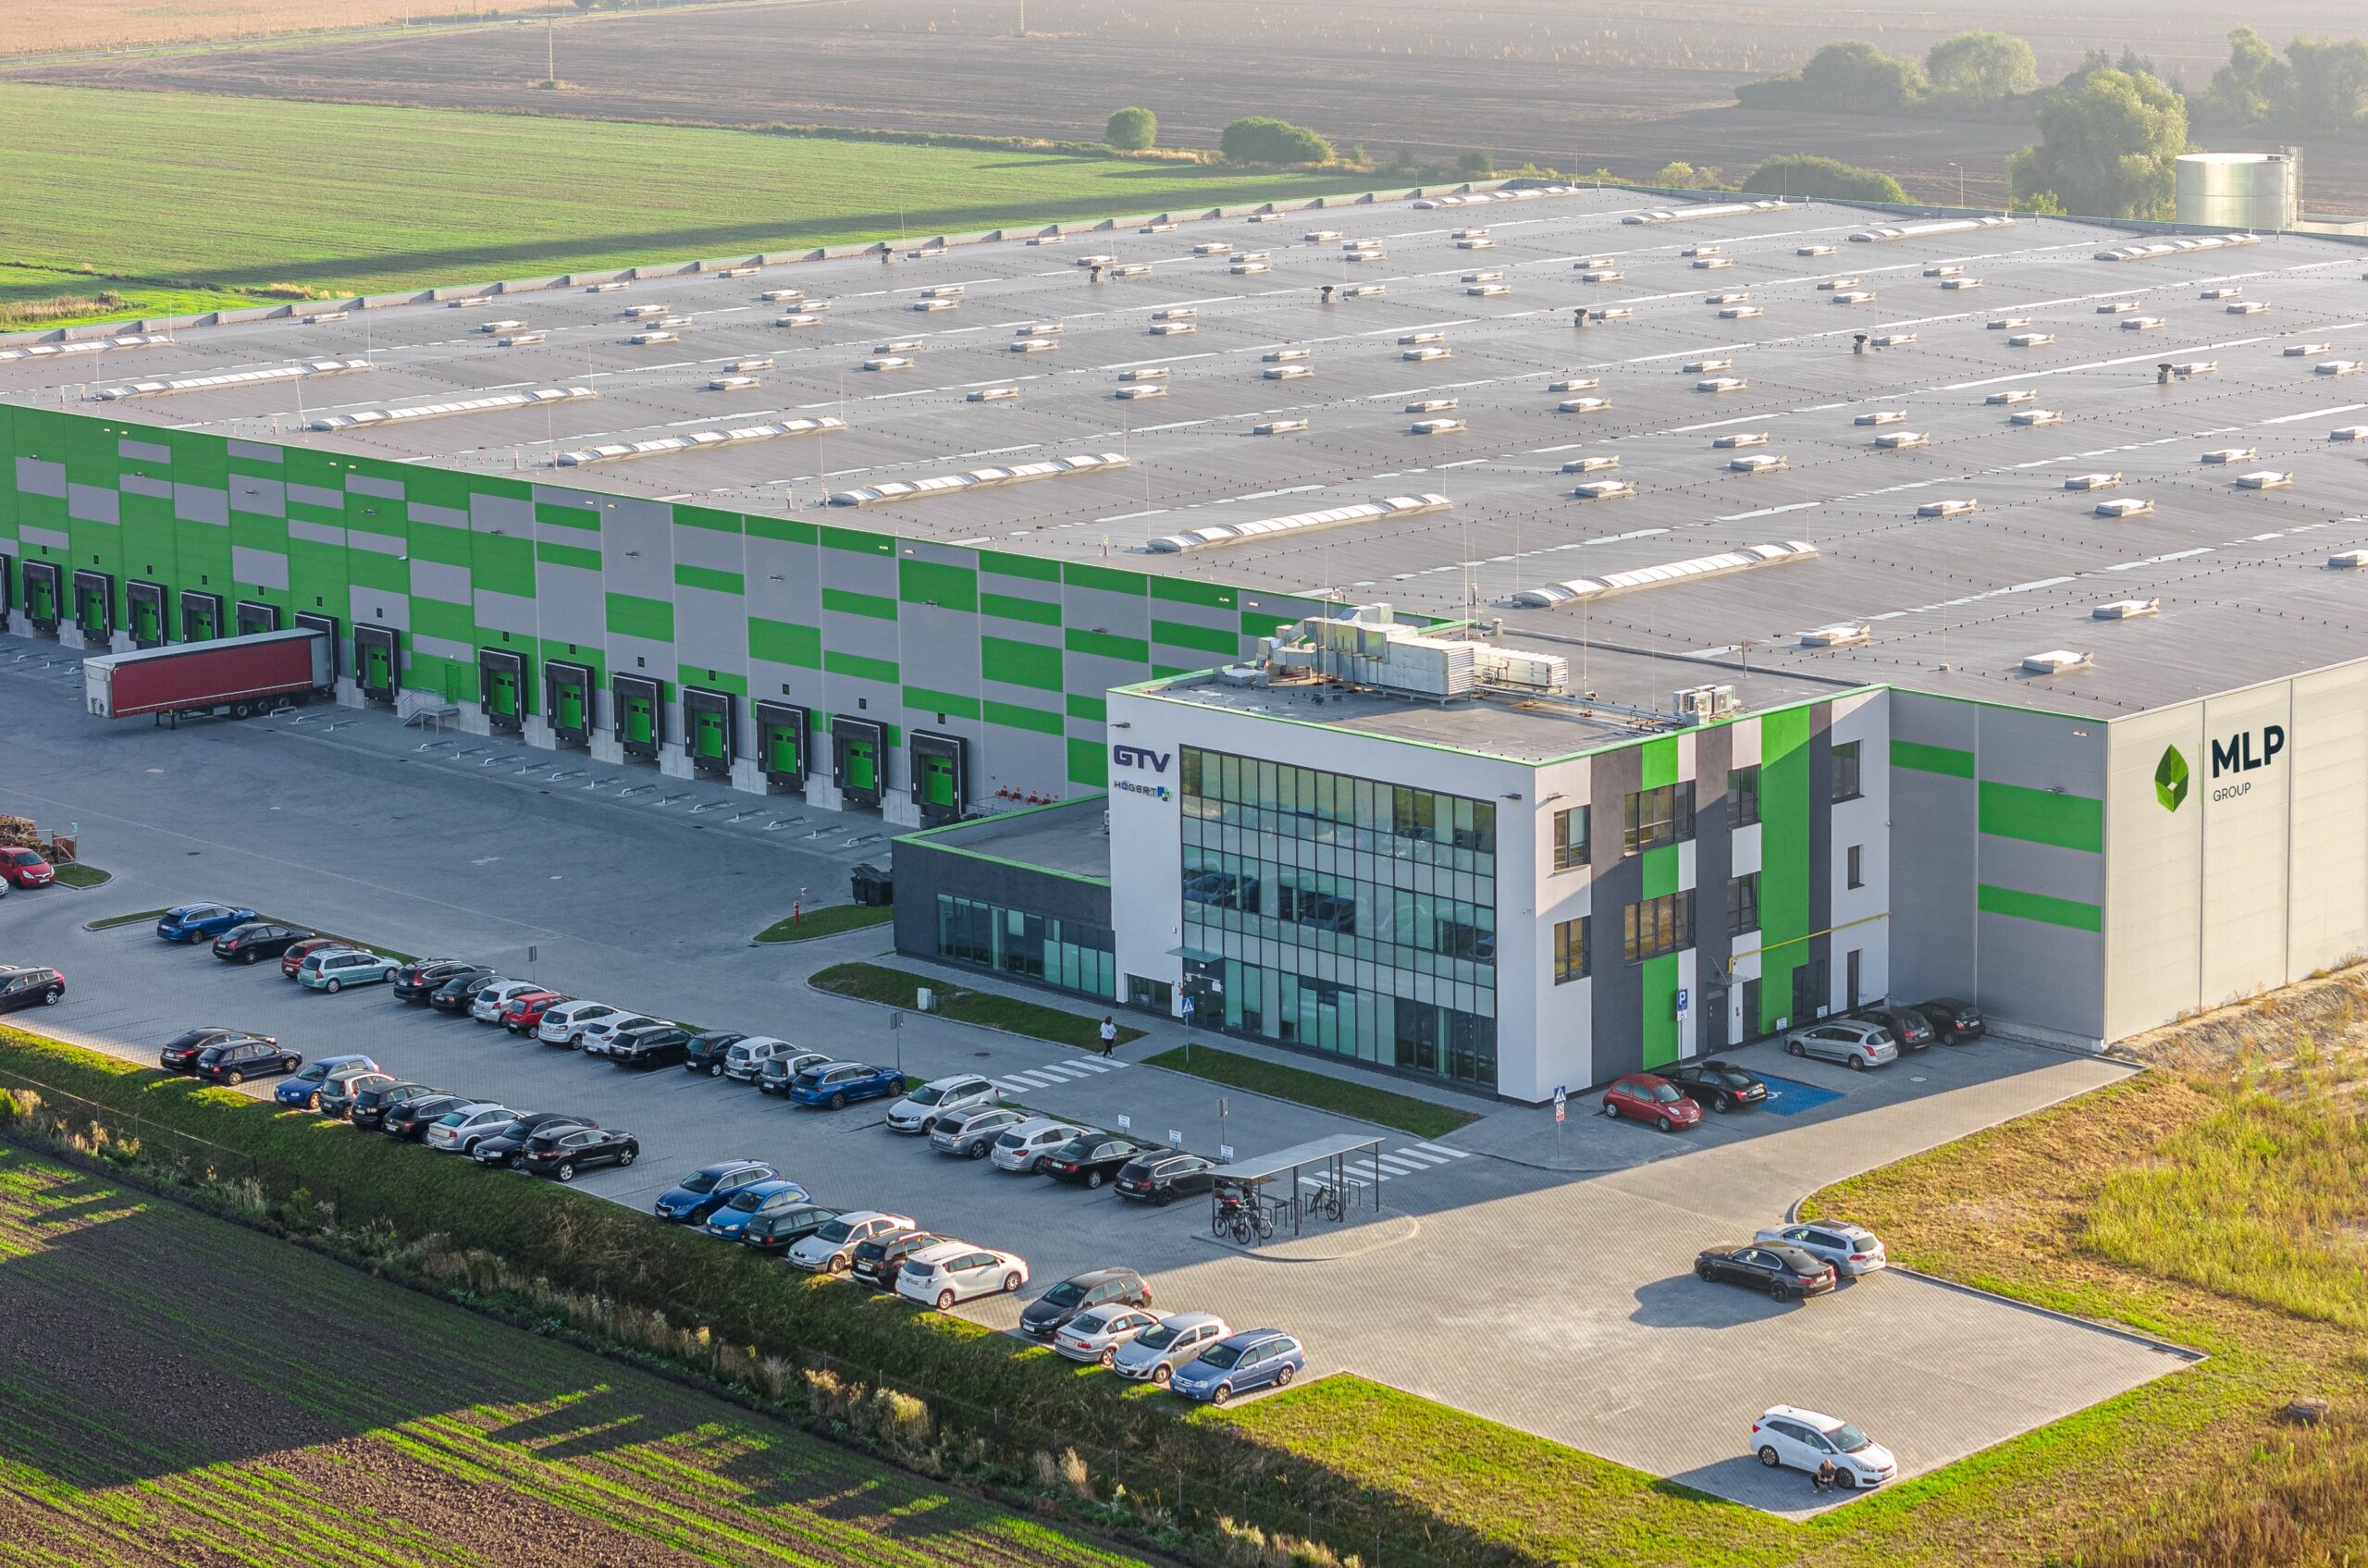 Over 47,000 sqm taken up by GTV at MLP Pruszków II